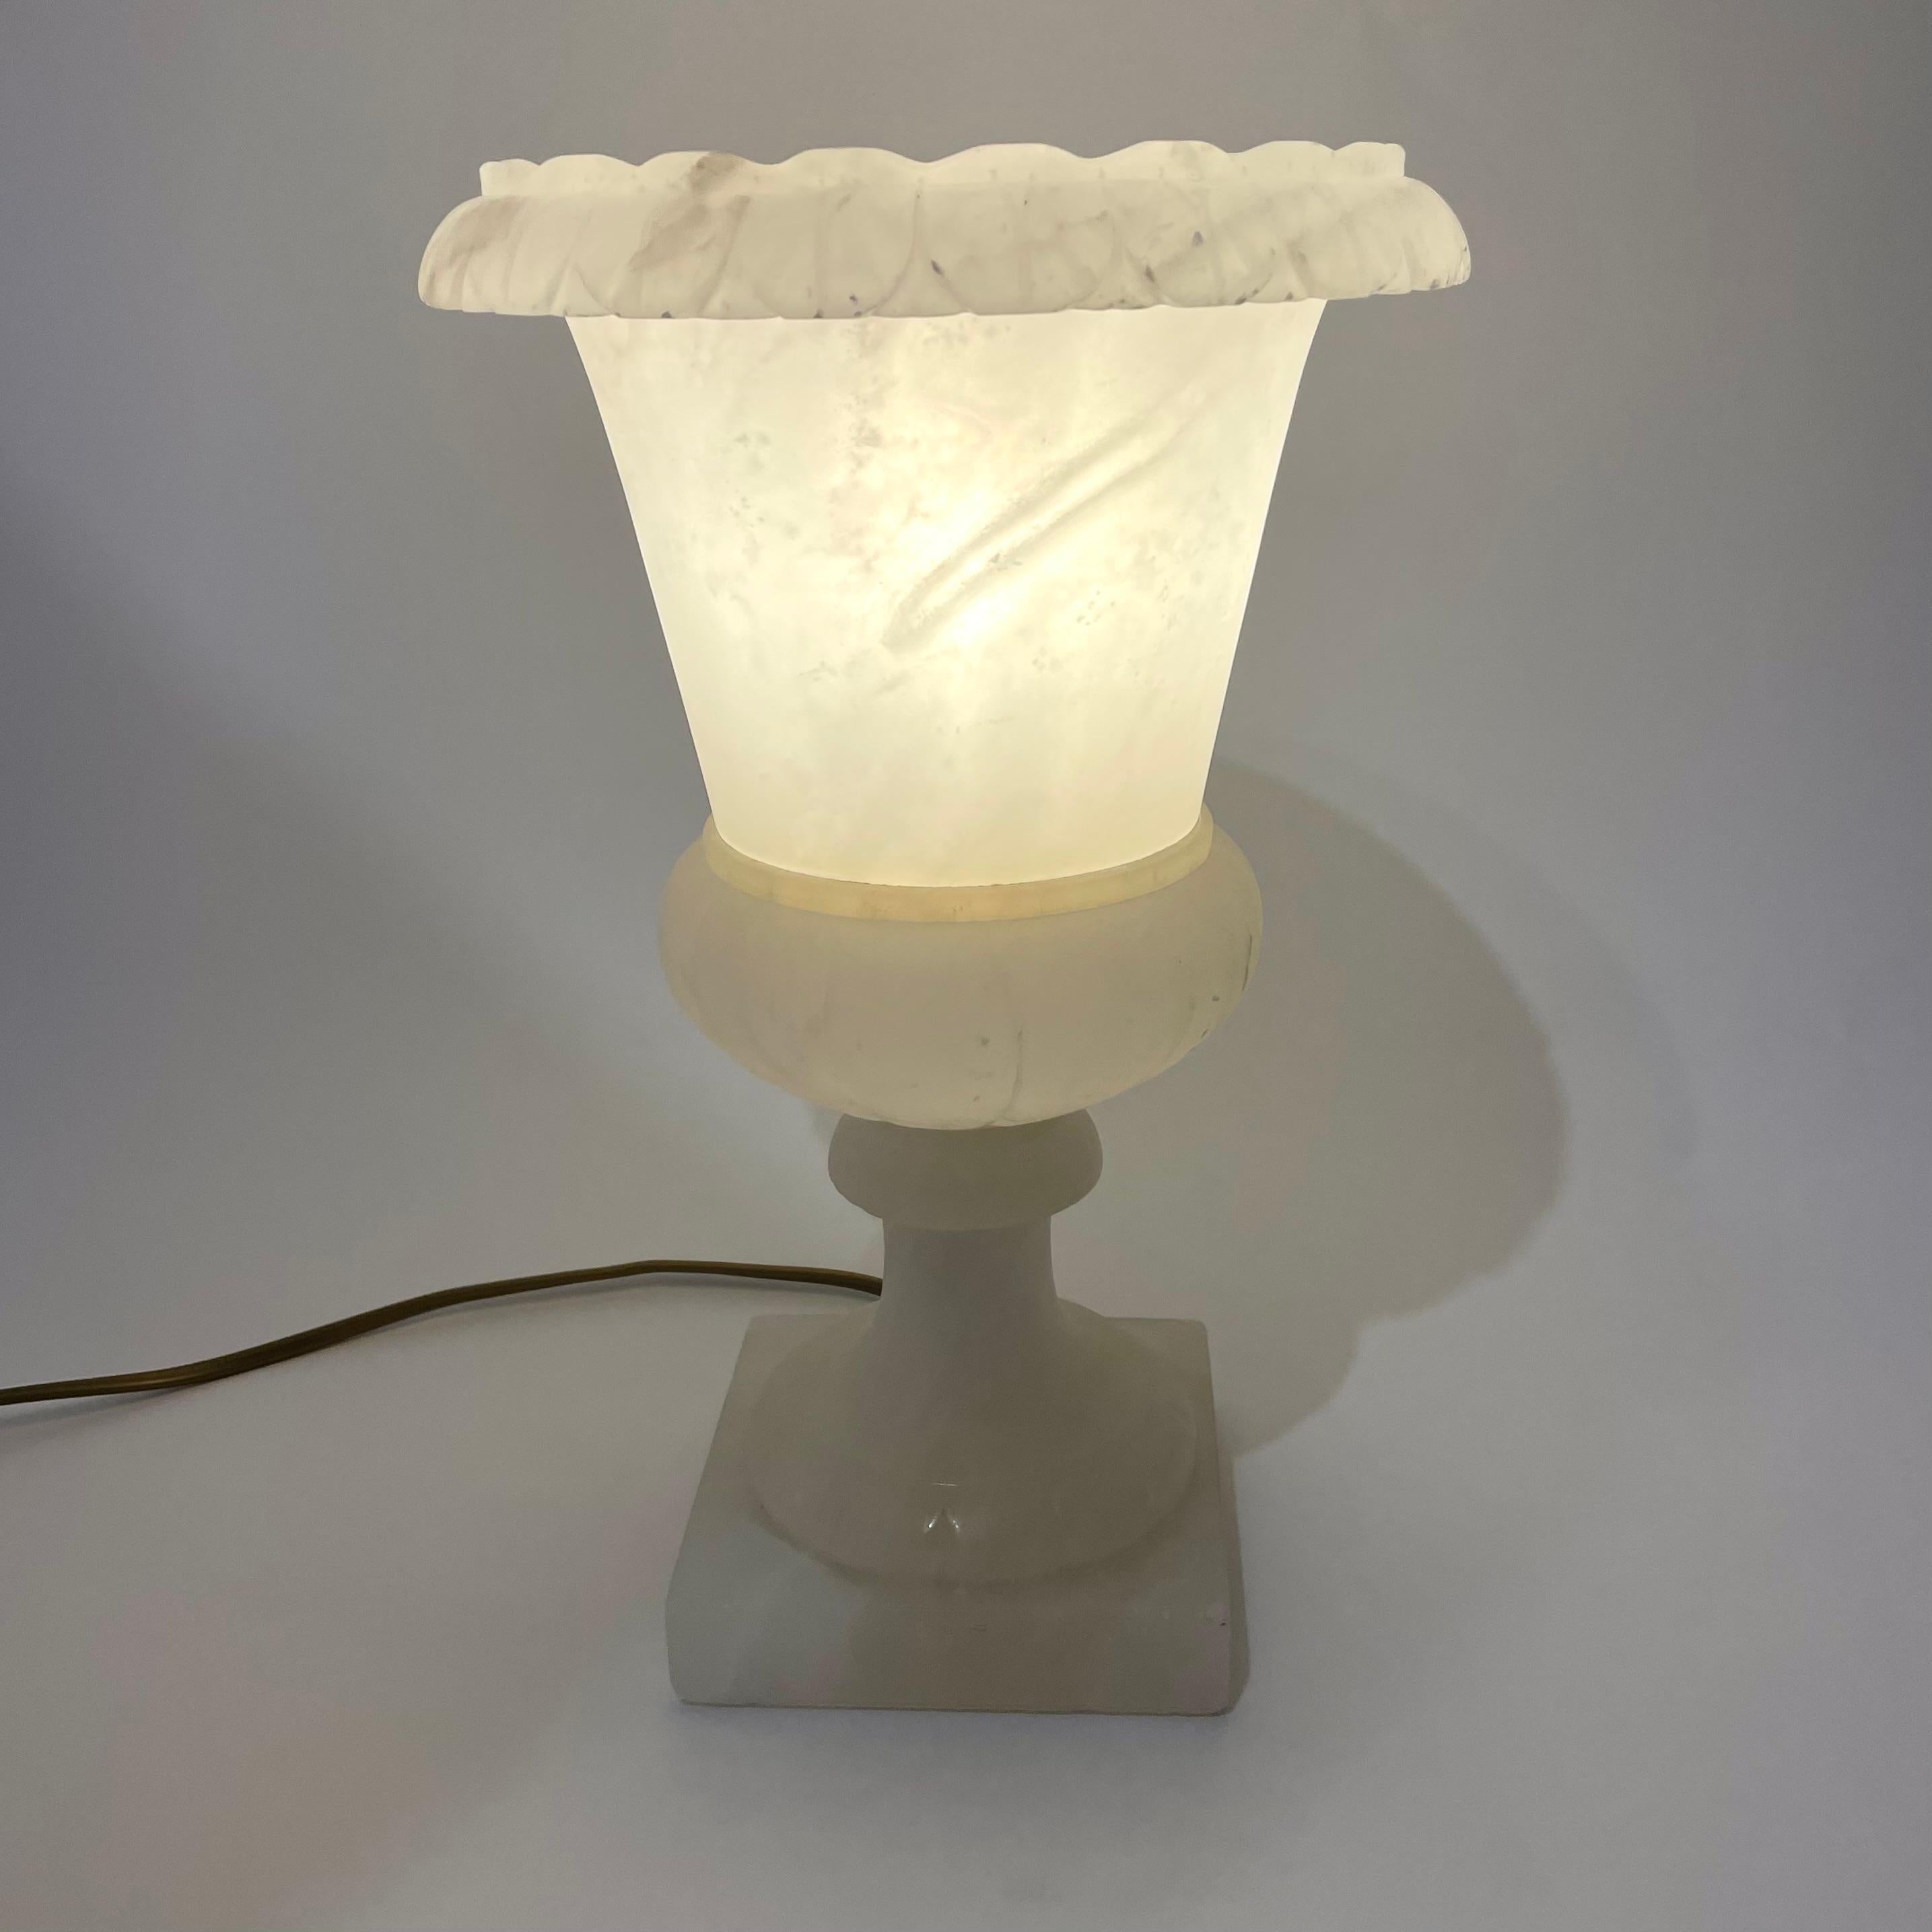 Elegant Alabaster Table Lamp in the Shape of a Classical Urn, Early 20th Century For Sale 1